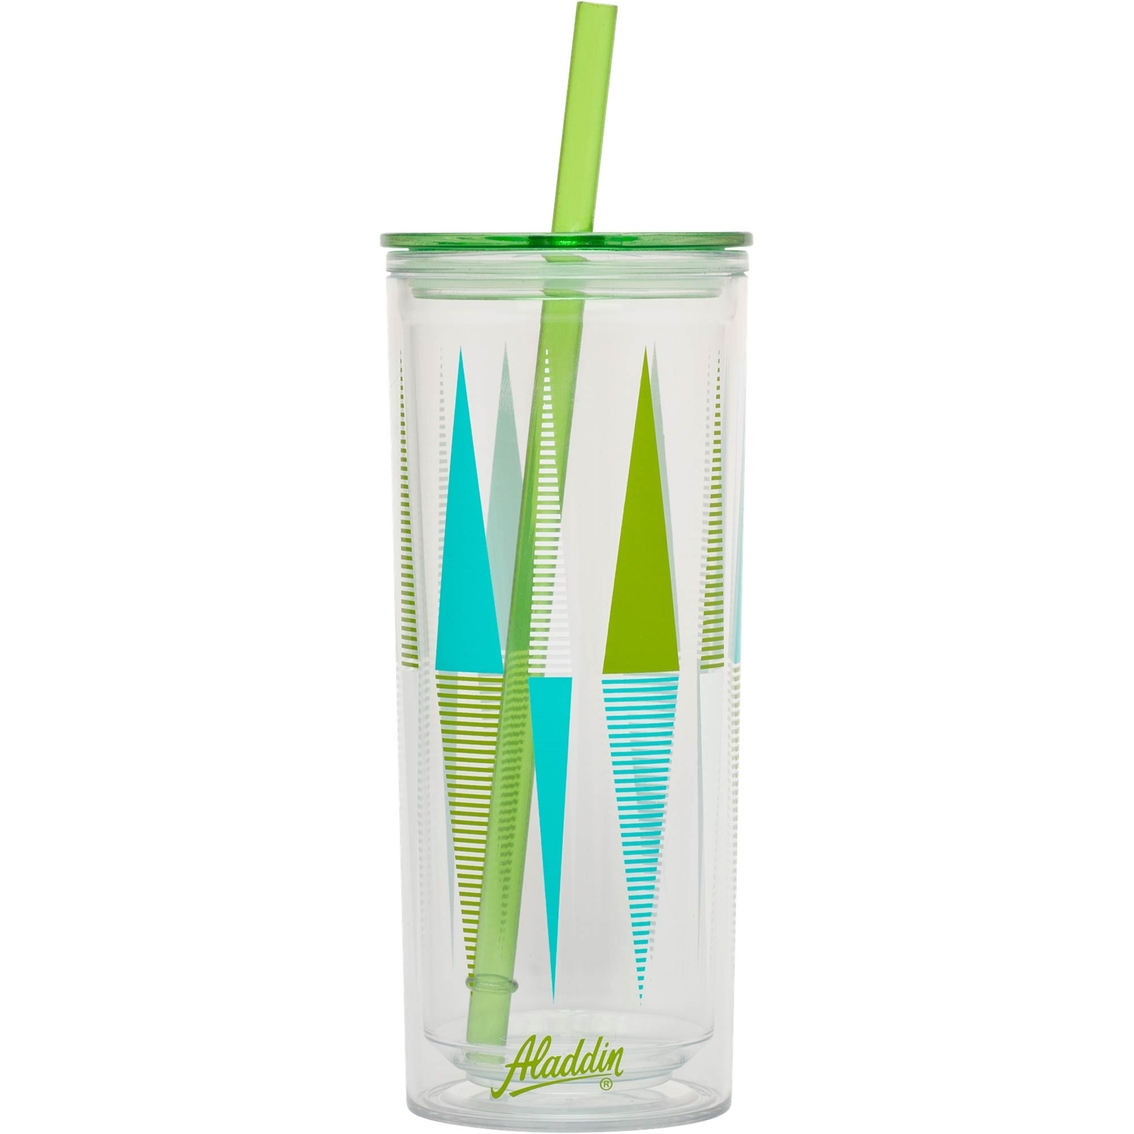 Aladdin 20 Oz. Insulated Plastic Collins Tumbler Thermal, Outdoor & Travel Back To School